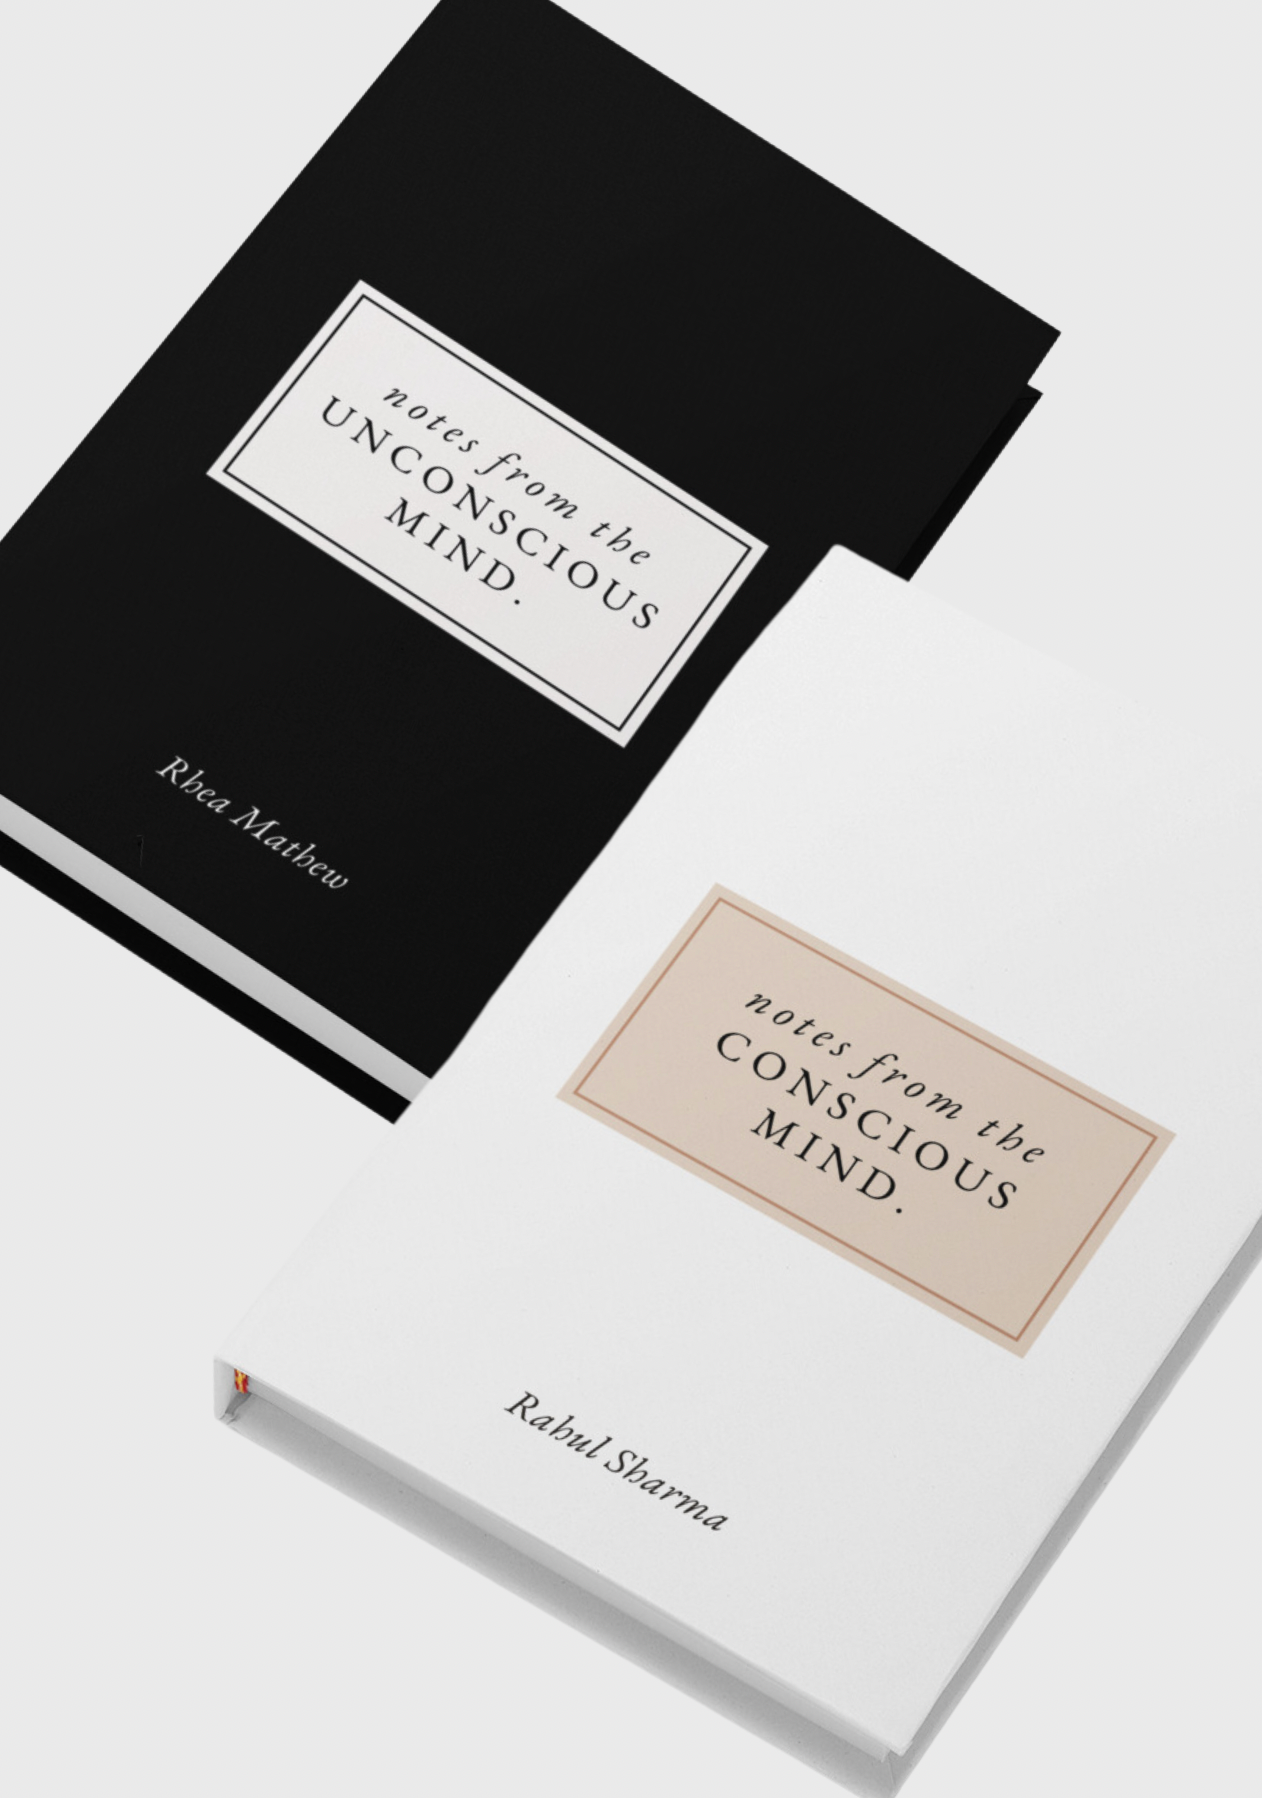 Personalised Notes from the (Un)conscious Mind Notebook